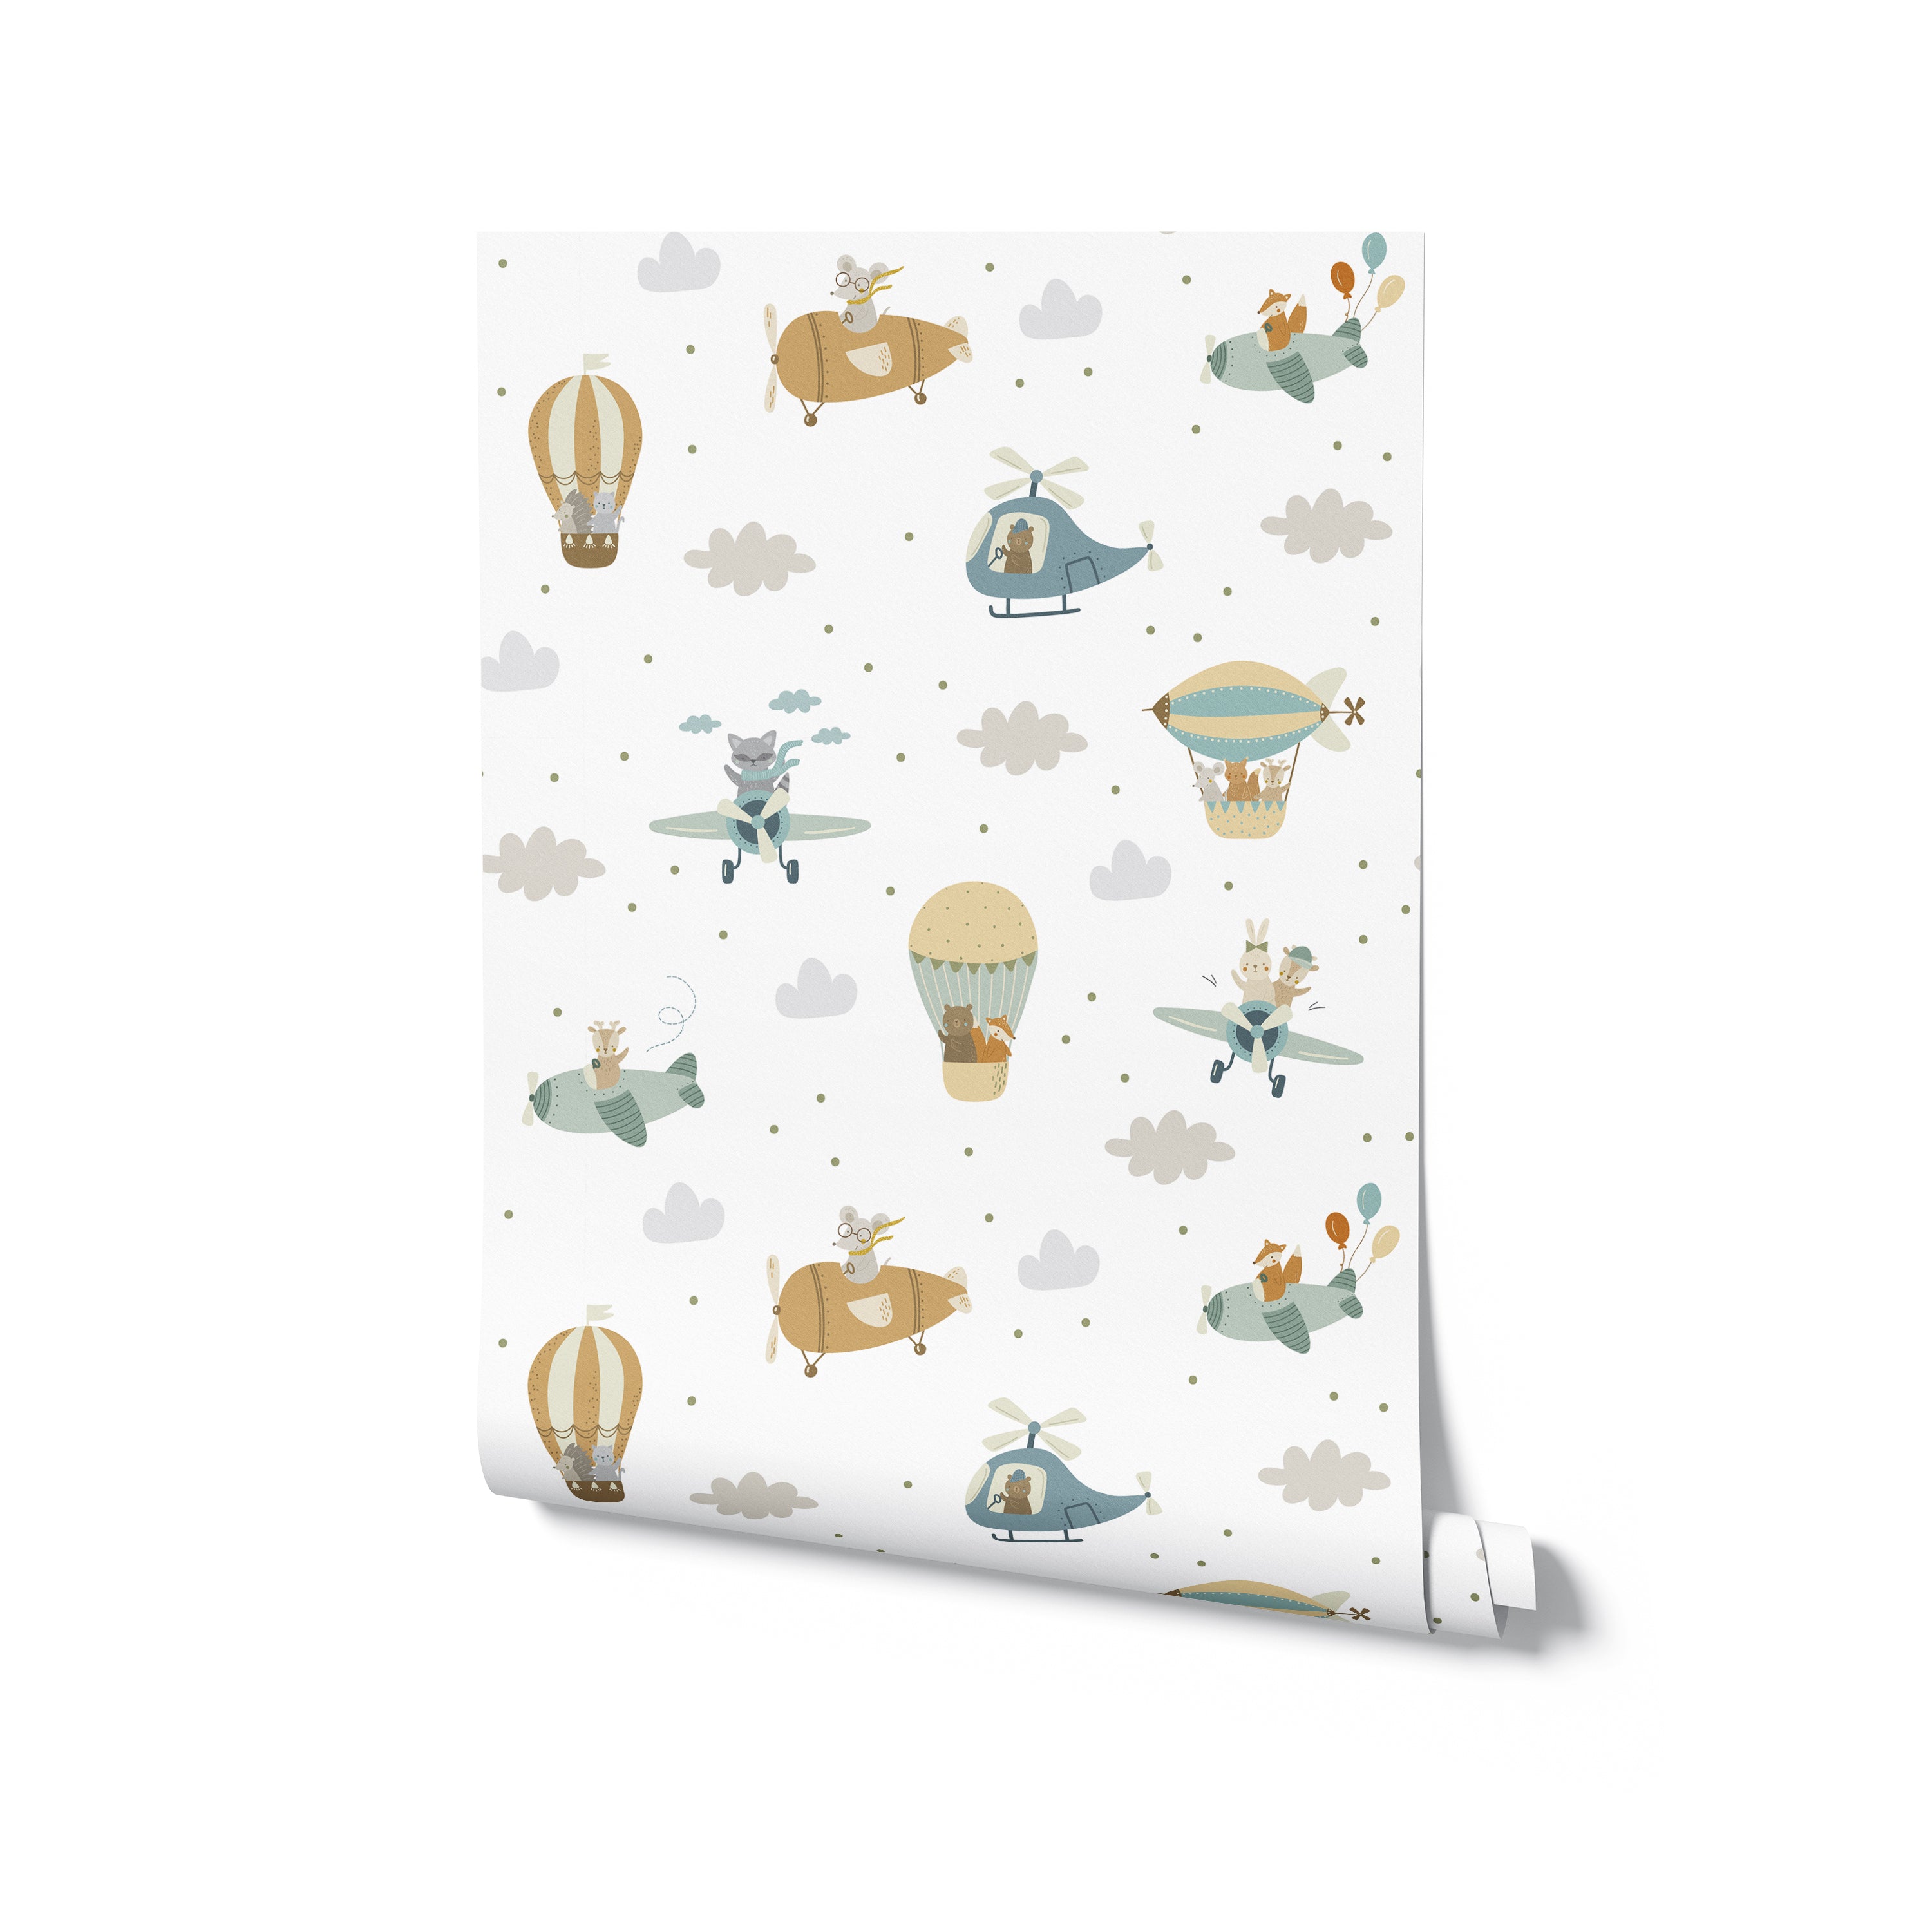 Rolled-up 'Flying Friends' wallpaper sample displaying an array of animals in flight, such as rabbits, foxes, and koalas, aboard whimsical aircraft. The playful design features a soft color palette with beige, greens, and blues, ideal for a child's room decor.